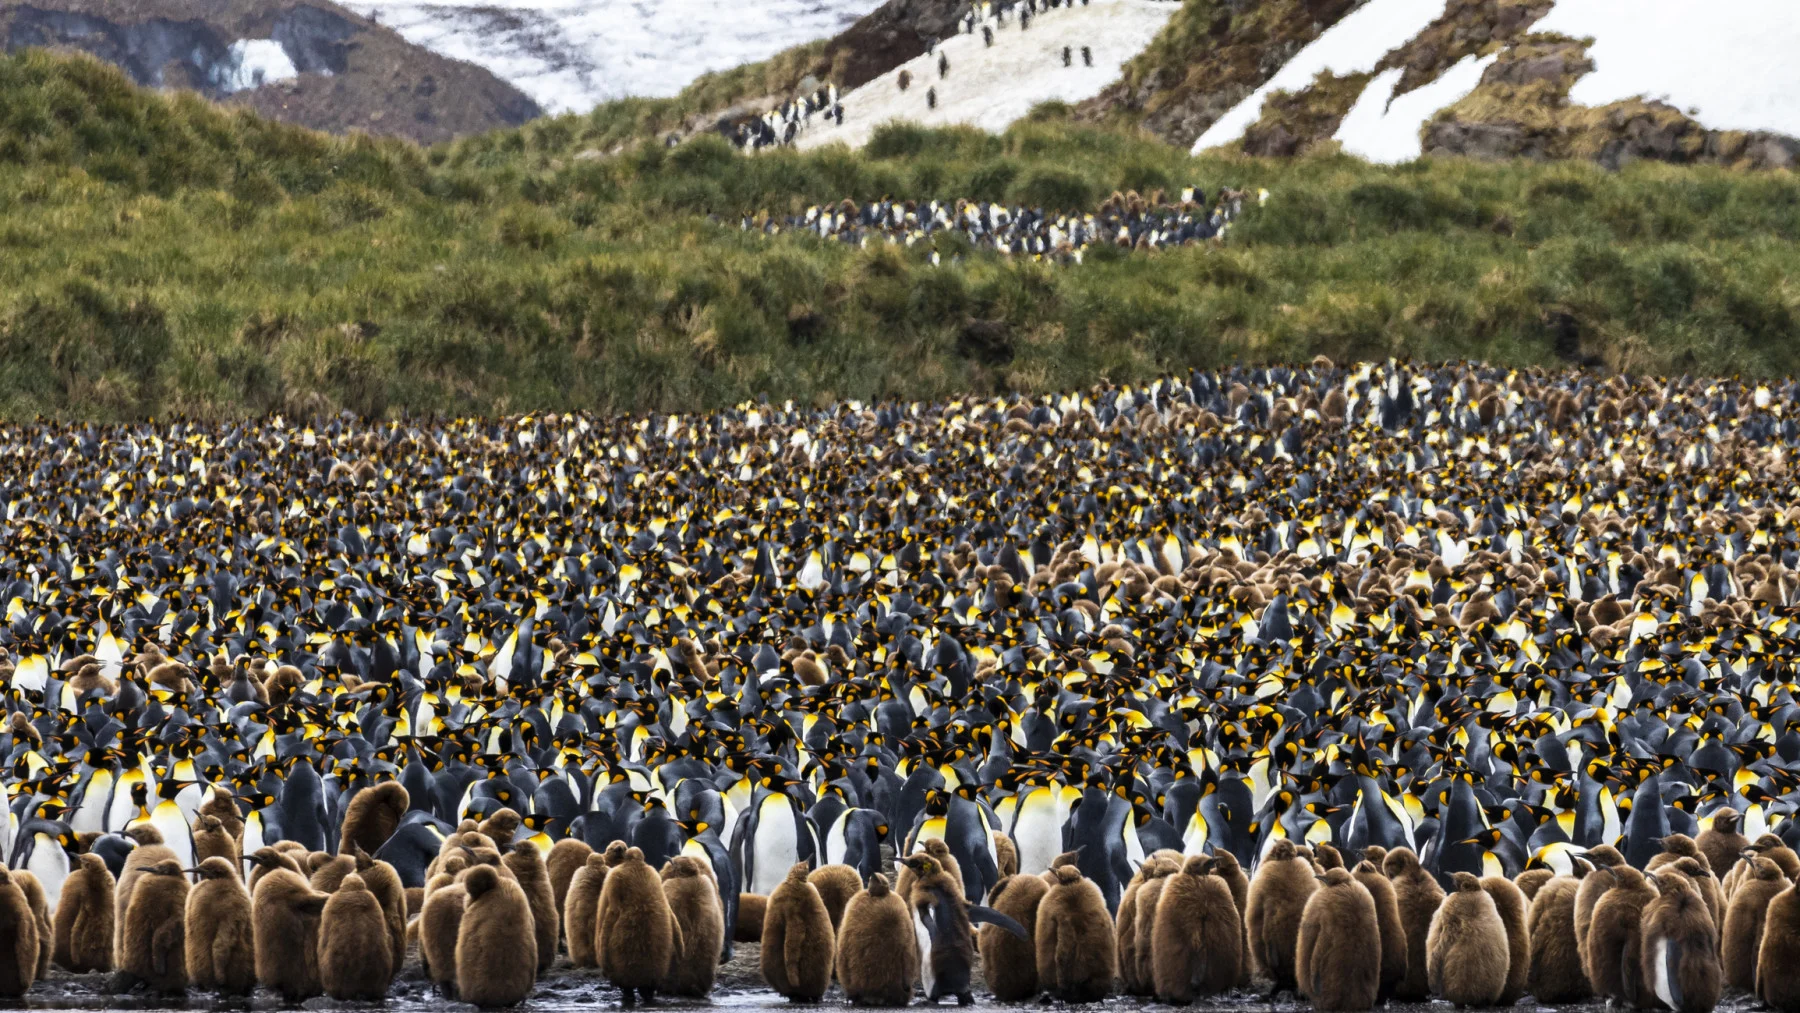 king penguin colony on south georgia island (Janet K Scott/ Moment/ Getty Images)